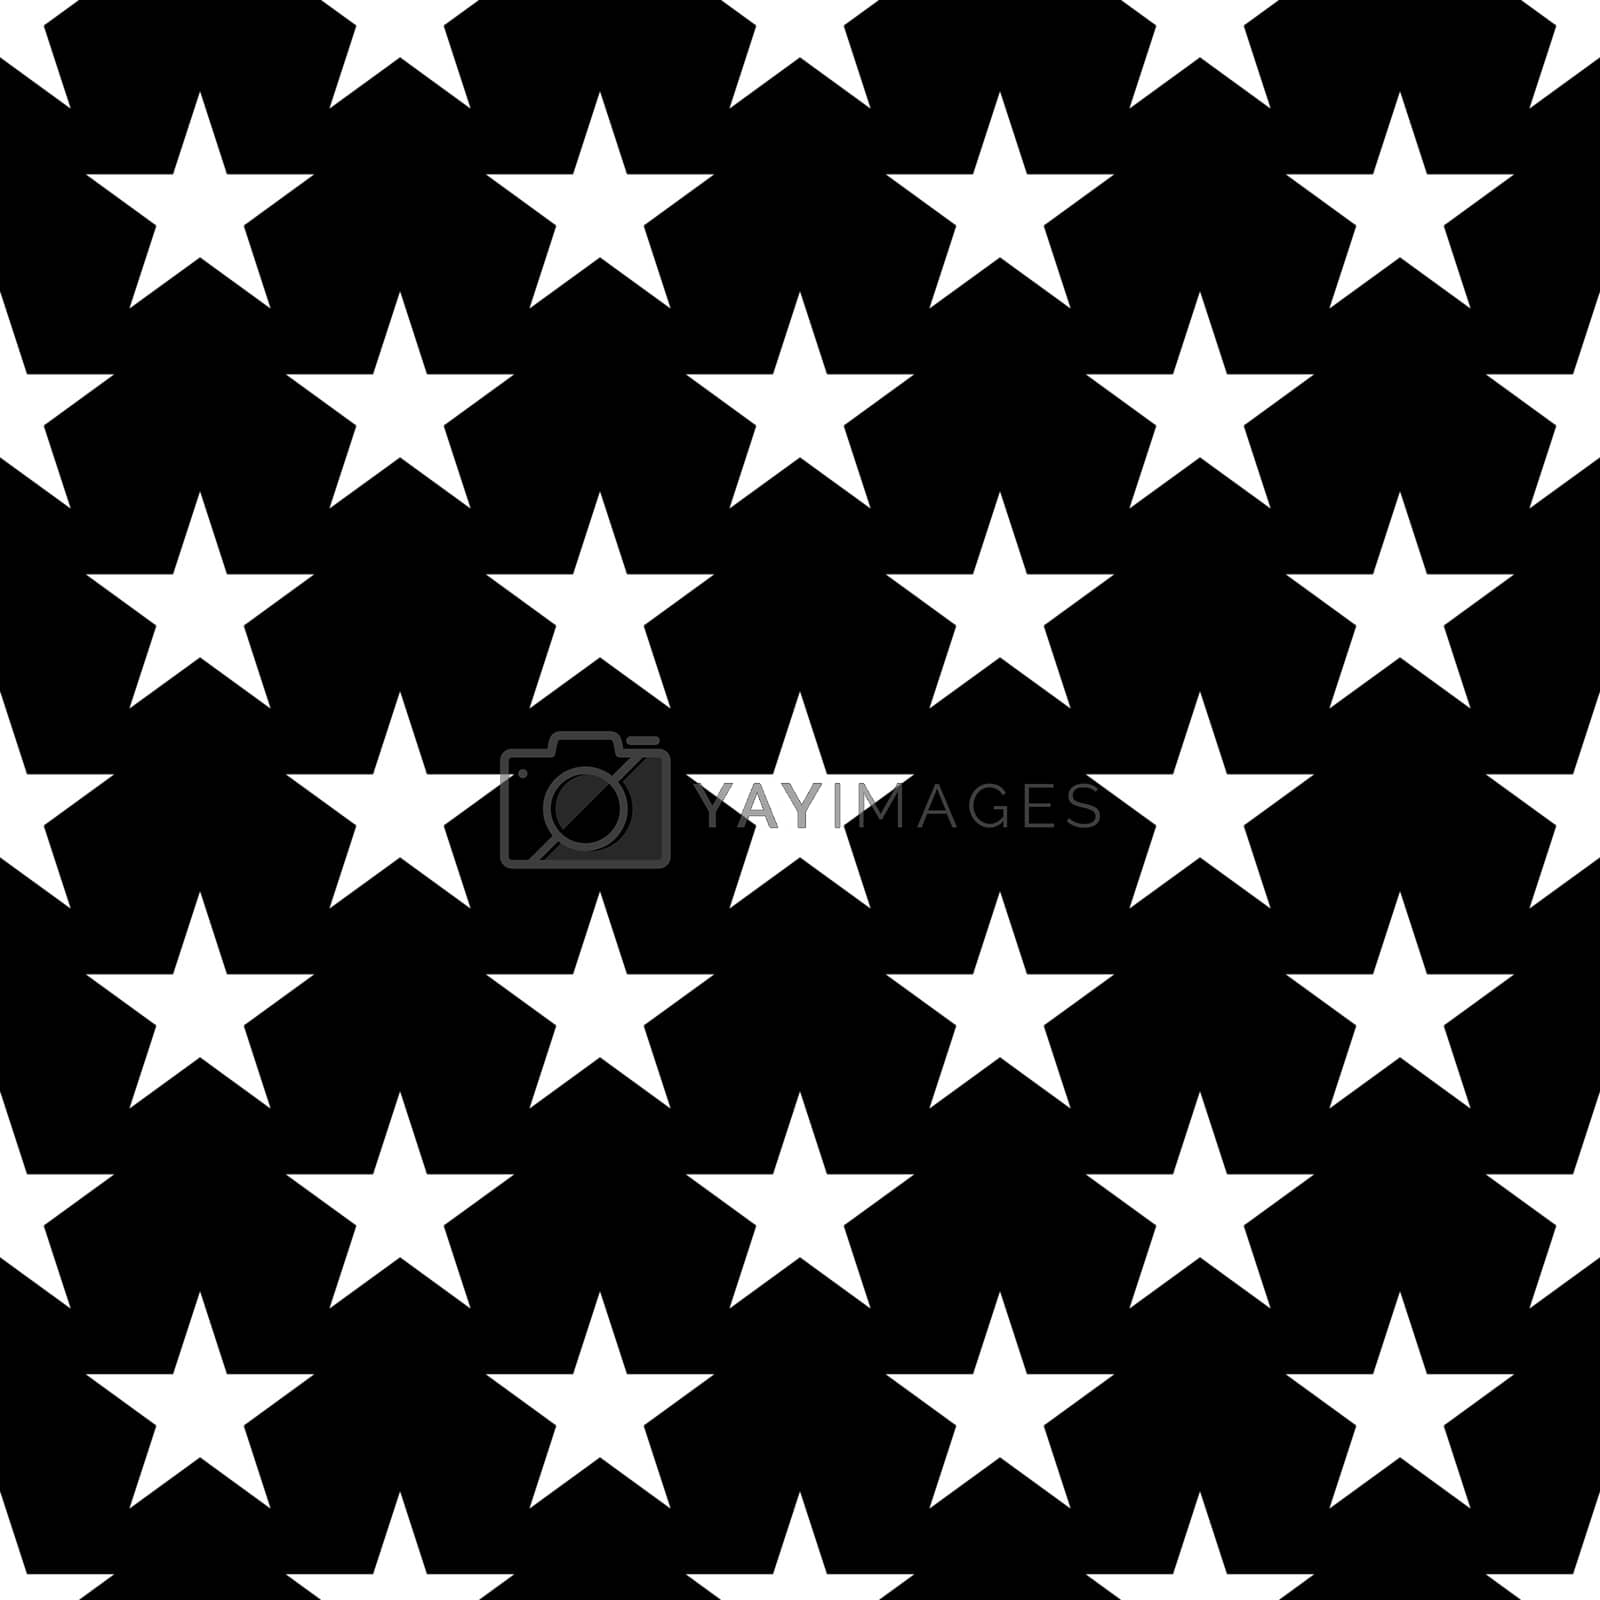 Royalty free image of Seamless pattern of white five-pointed stars on black background. Vector illustration by pyty